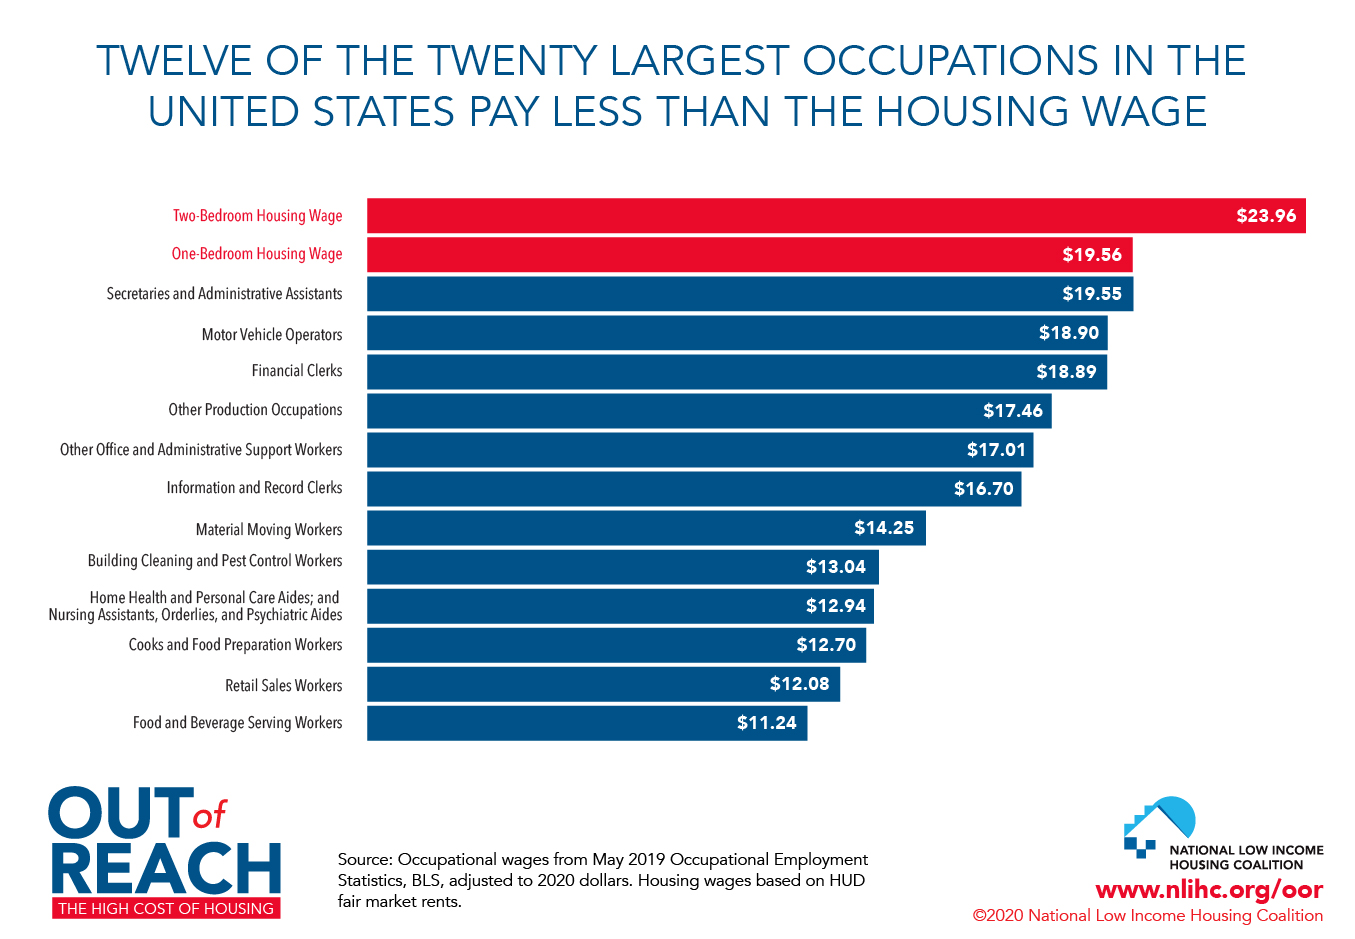 Twelve of the Twenty Largest Occupations in the U.S. Pay Less Than the One-Bedroom Housing Wage